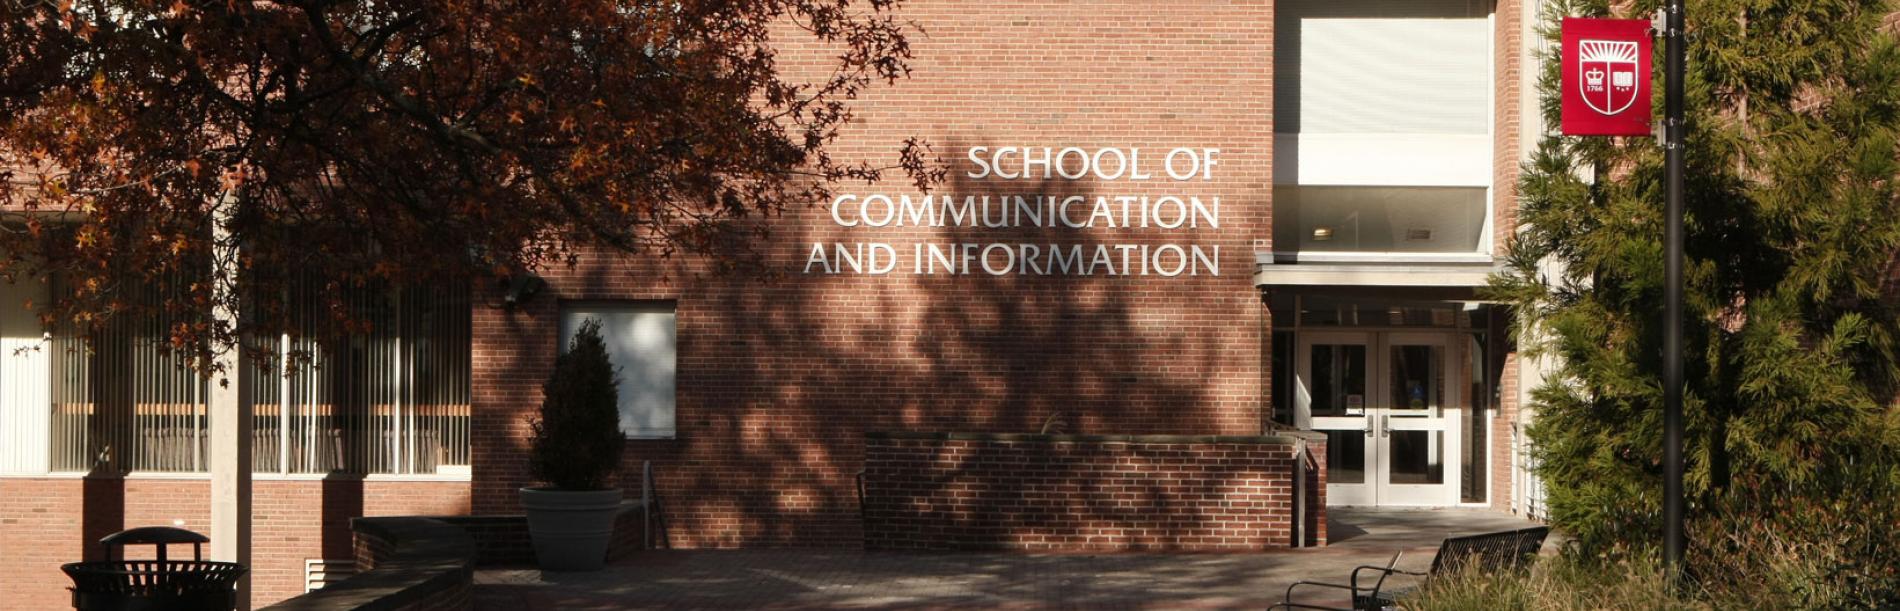 School of Communication and Information